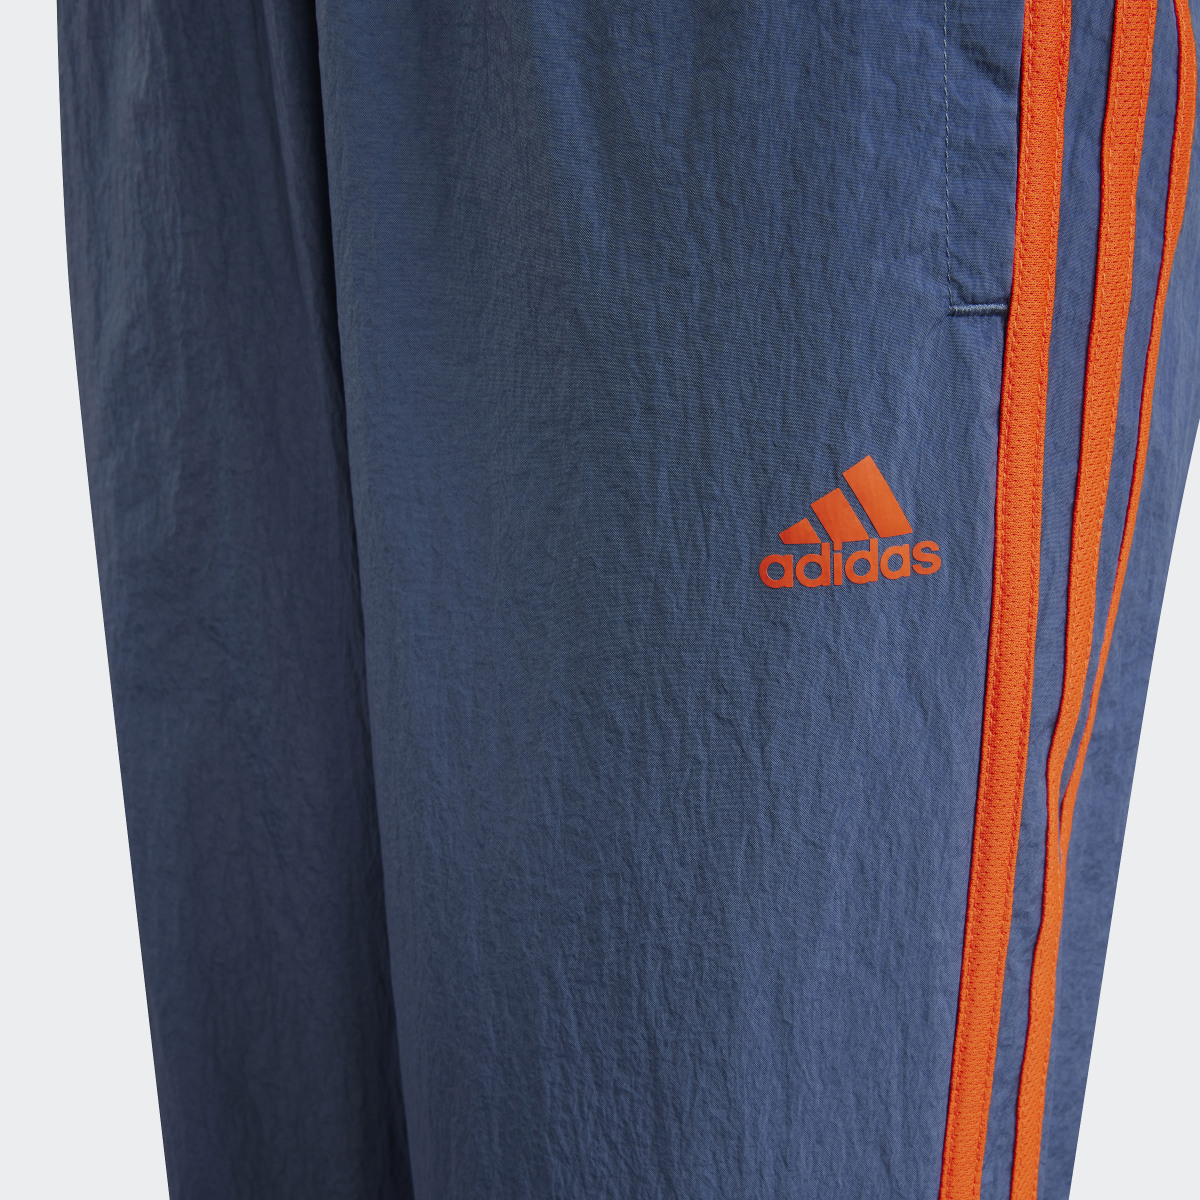 Adidas Colorblock Woven Tracksuit Bottoms. 4